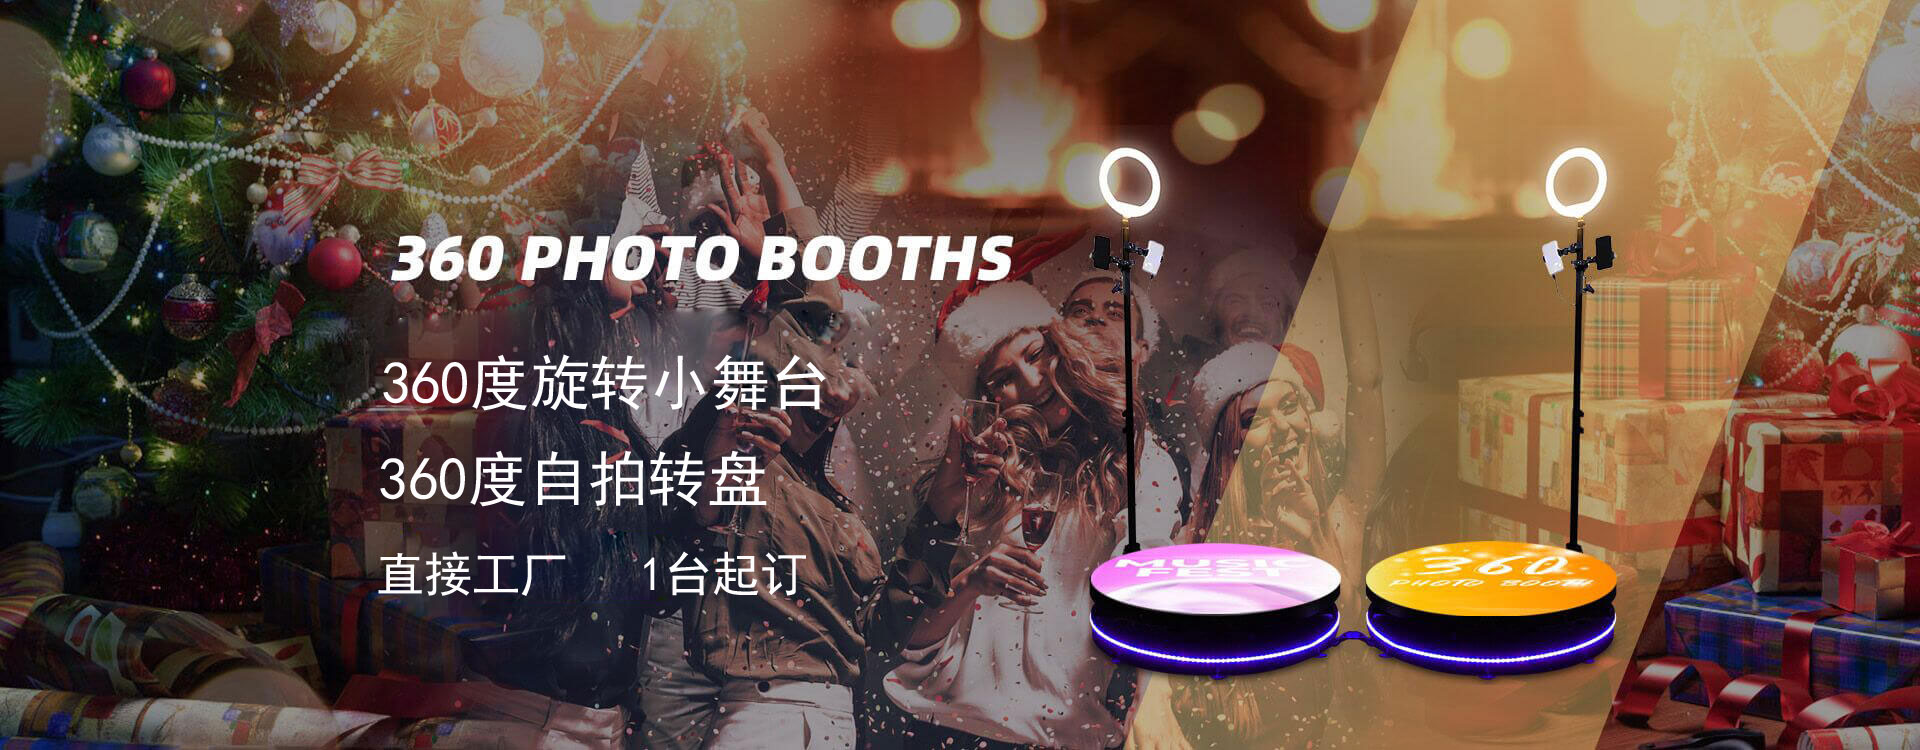 https://www.360photobooth.cn/wp-content/uploads/2021/09/360-Photo-Booth-manufacturer.jpg